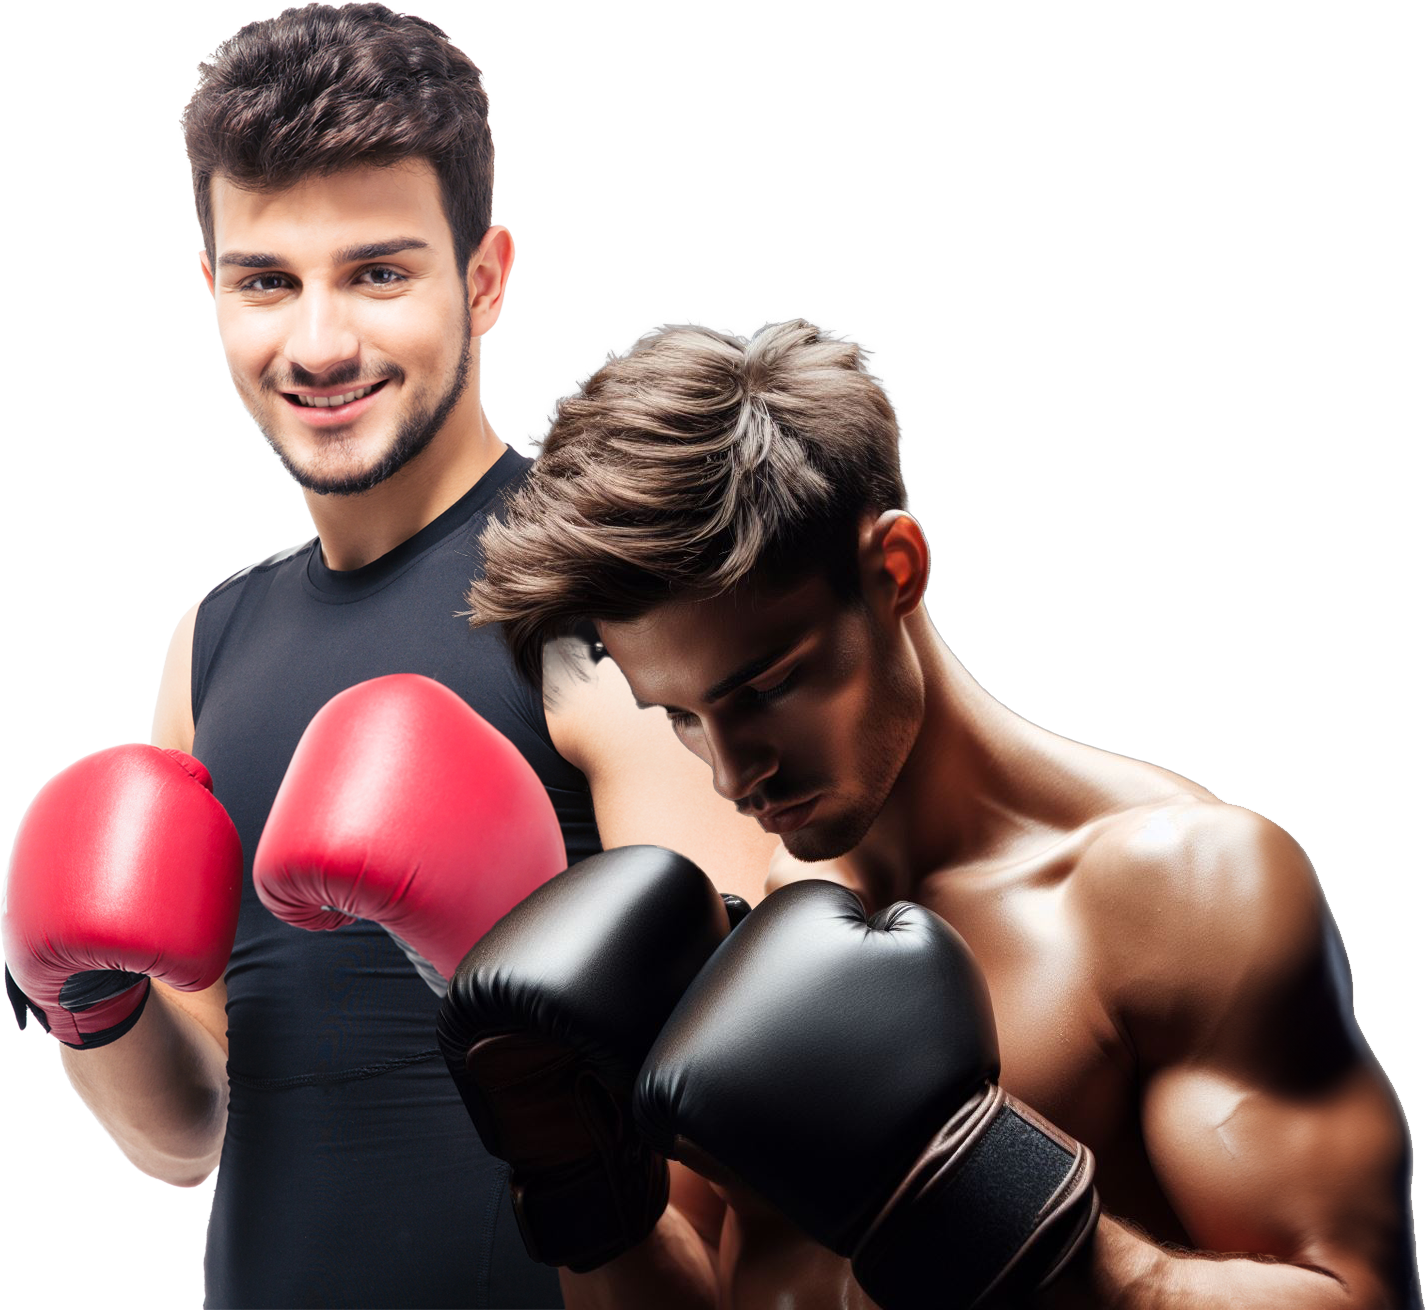 Two men wearing boxing gloves are standing next to each other.